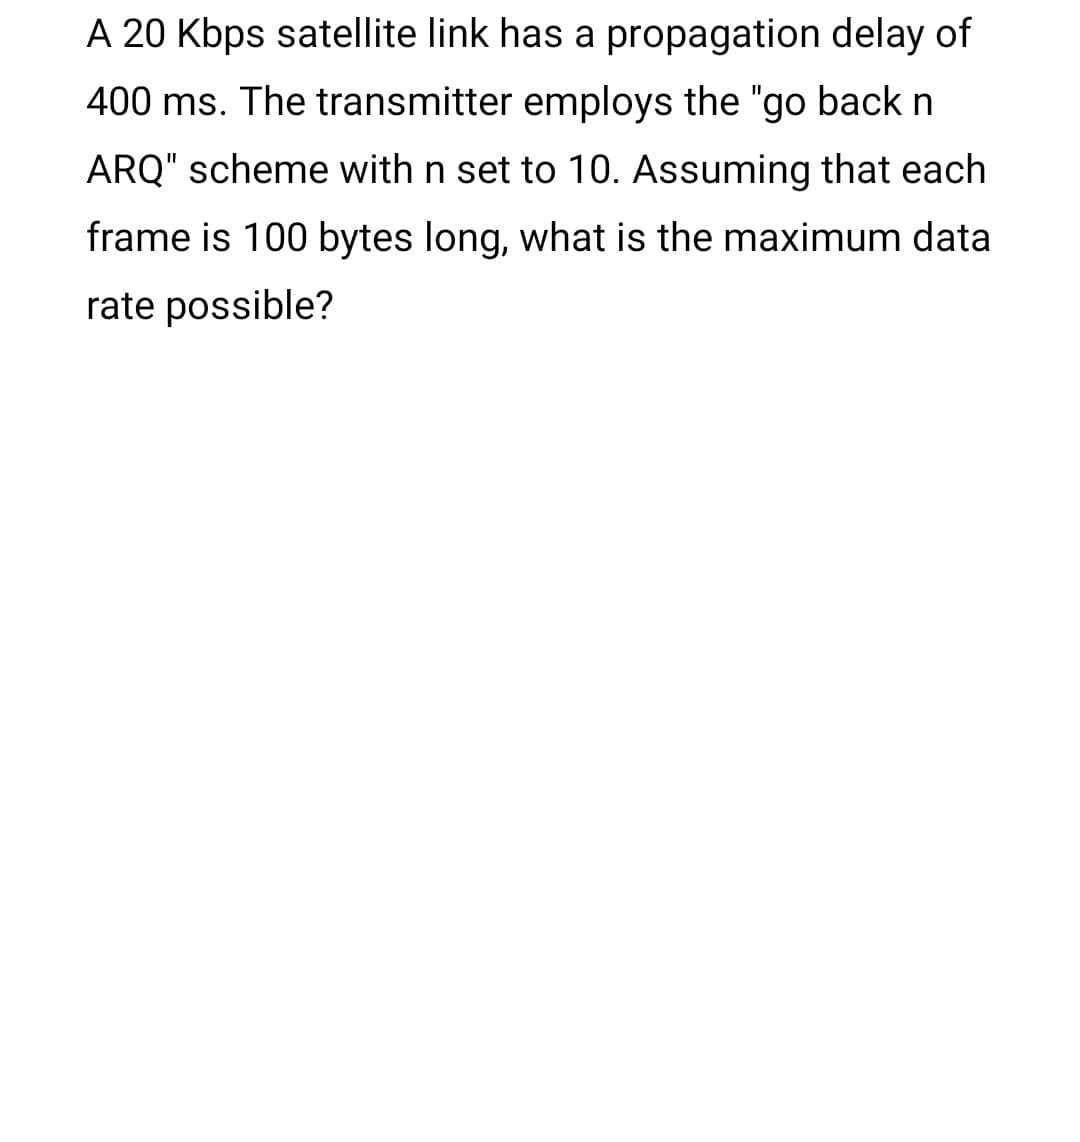 A 20 Kbps satellite link has a propagation delay of
400 ms. The transmitter employs the "go back n
ARQ" scheme with n set to 10. Assuming that each
frame is 100 bytes long, what is the maximum data
rate possible?
